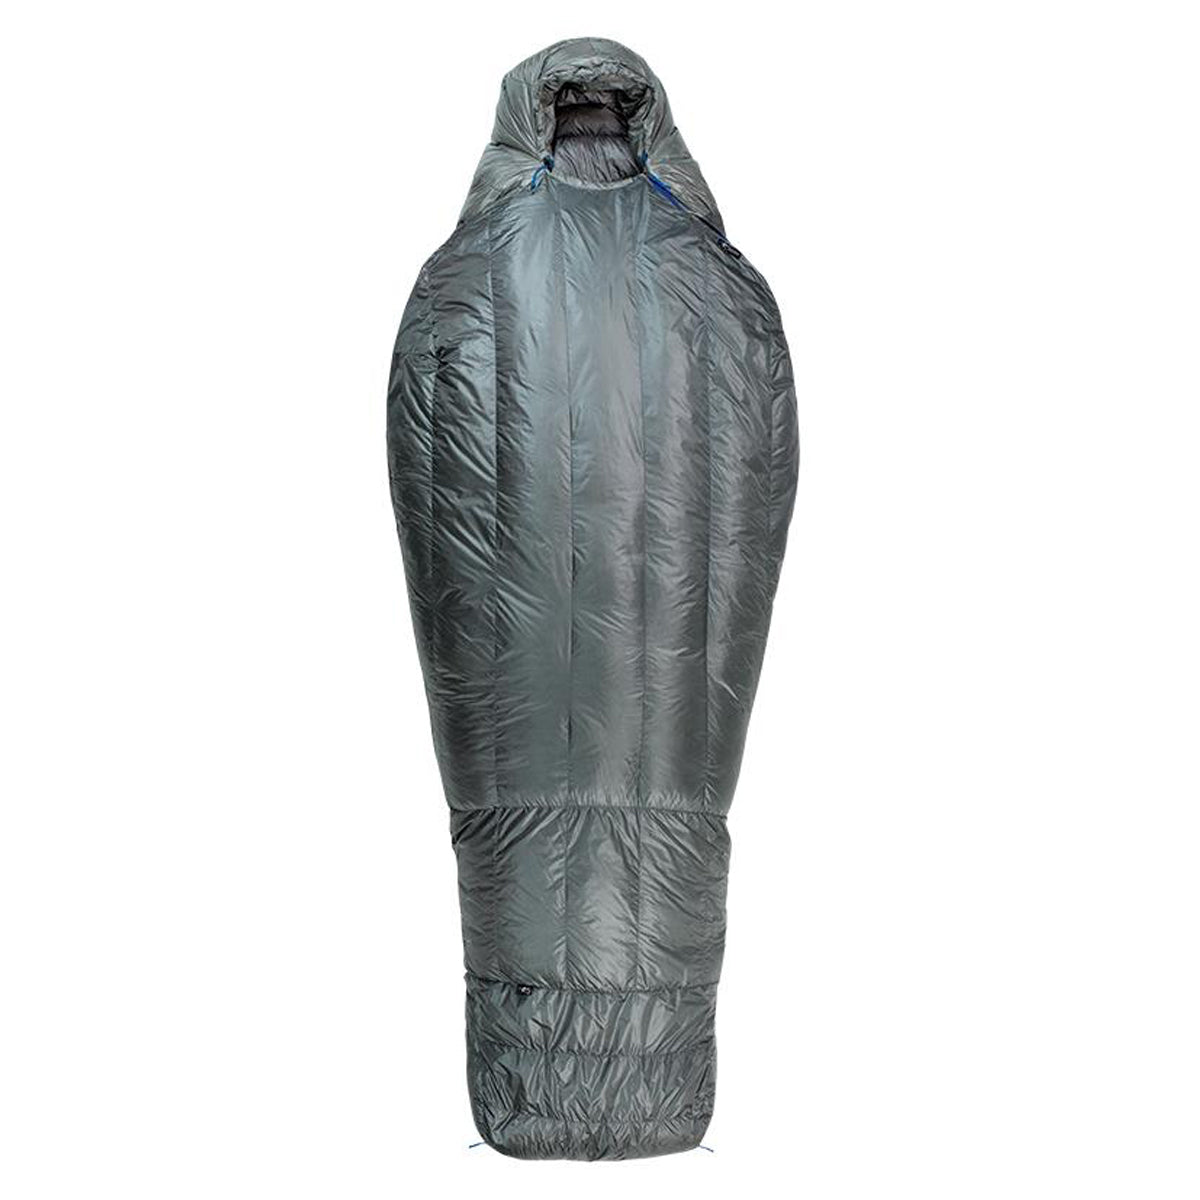 Stone Glacier Chilkoot 0° Sleeping Bag in Stone Glacier Chilkoot 0º Sleeping Bag by Stone Glacier | Camping - goHUNT Shop by GOHUNT | Stone Glacier - GOHUNT Shop